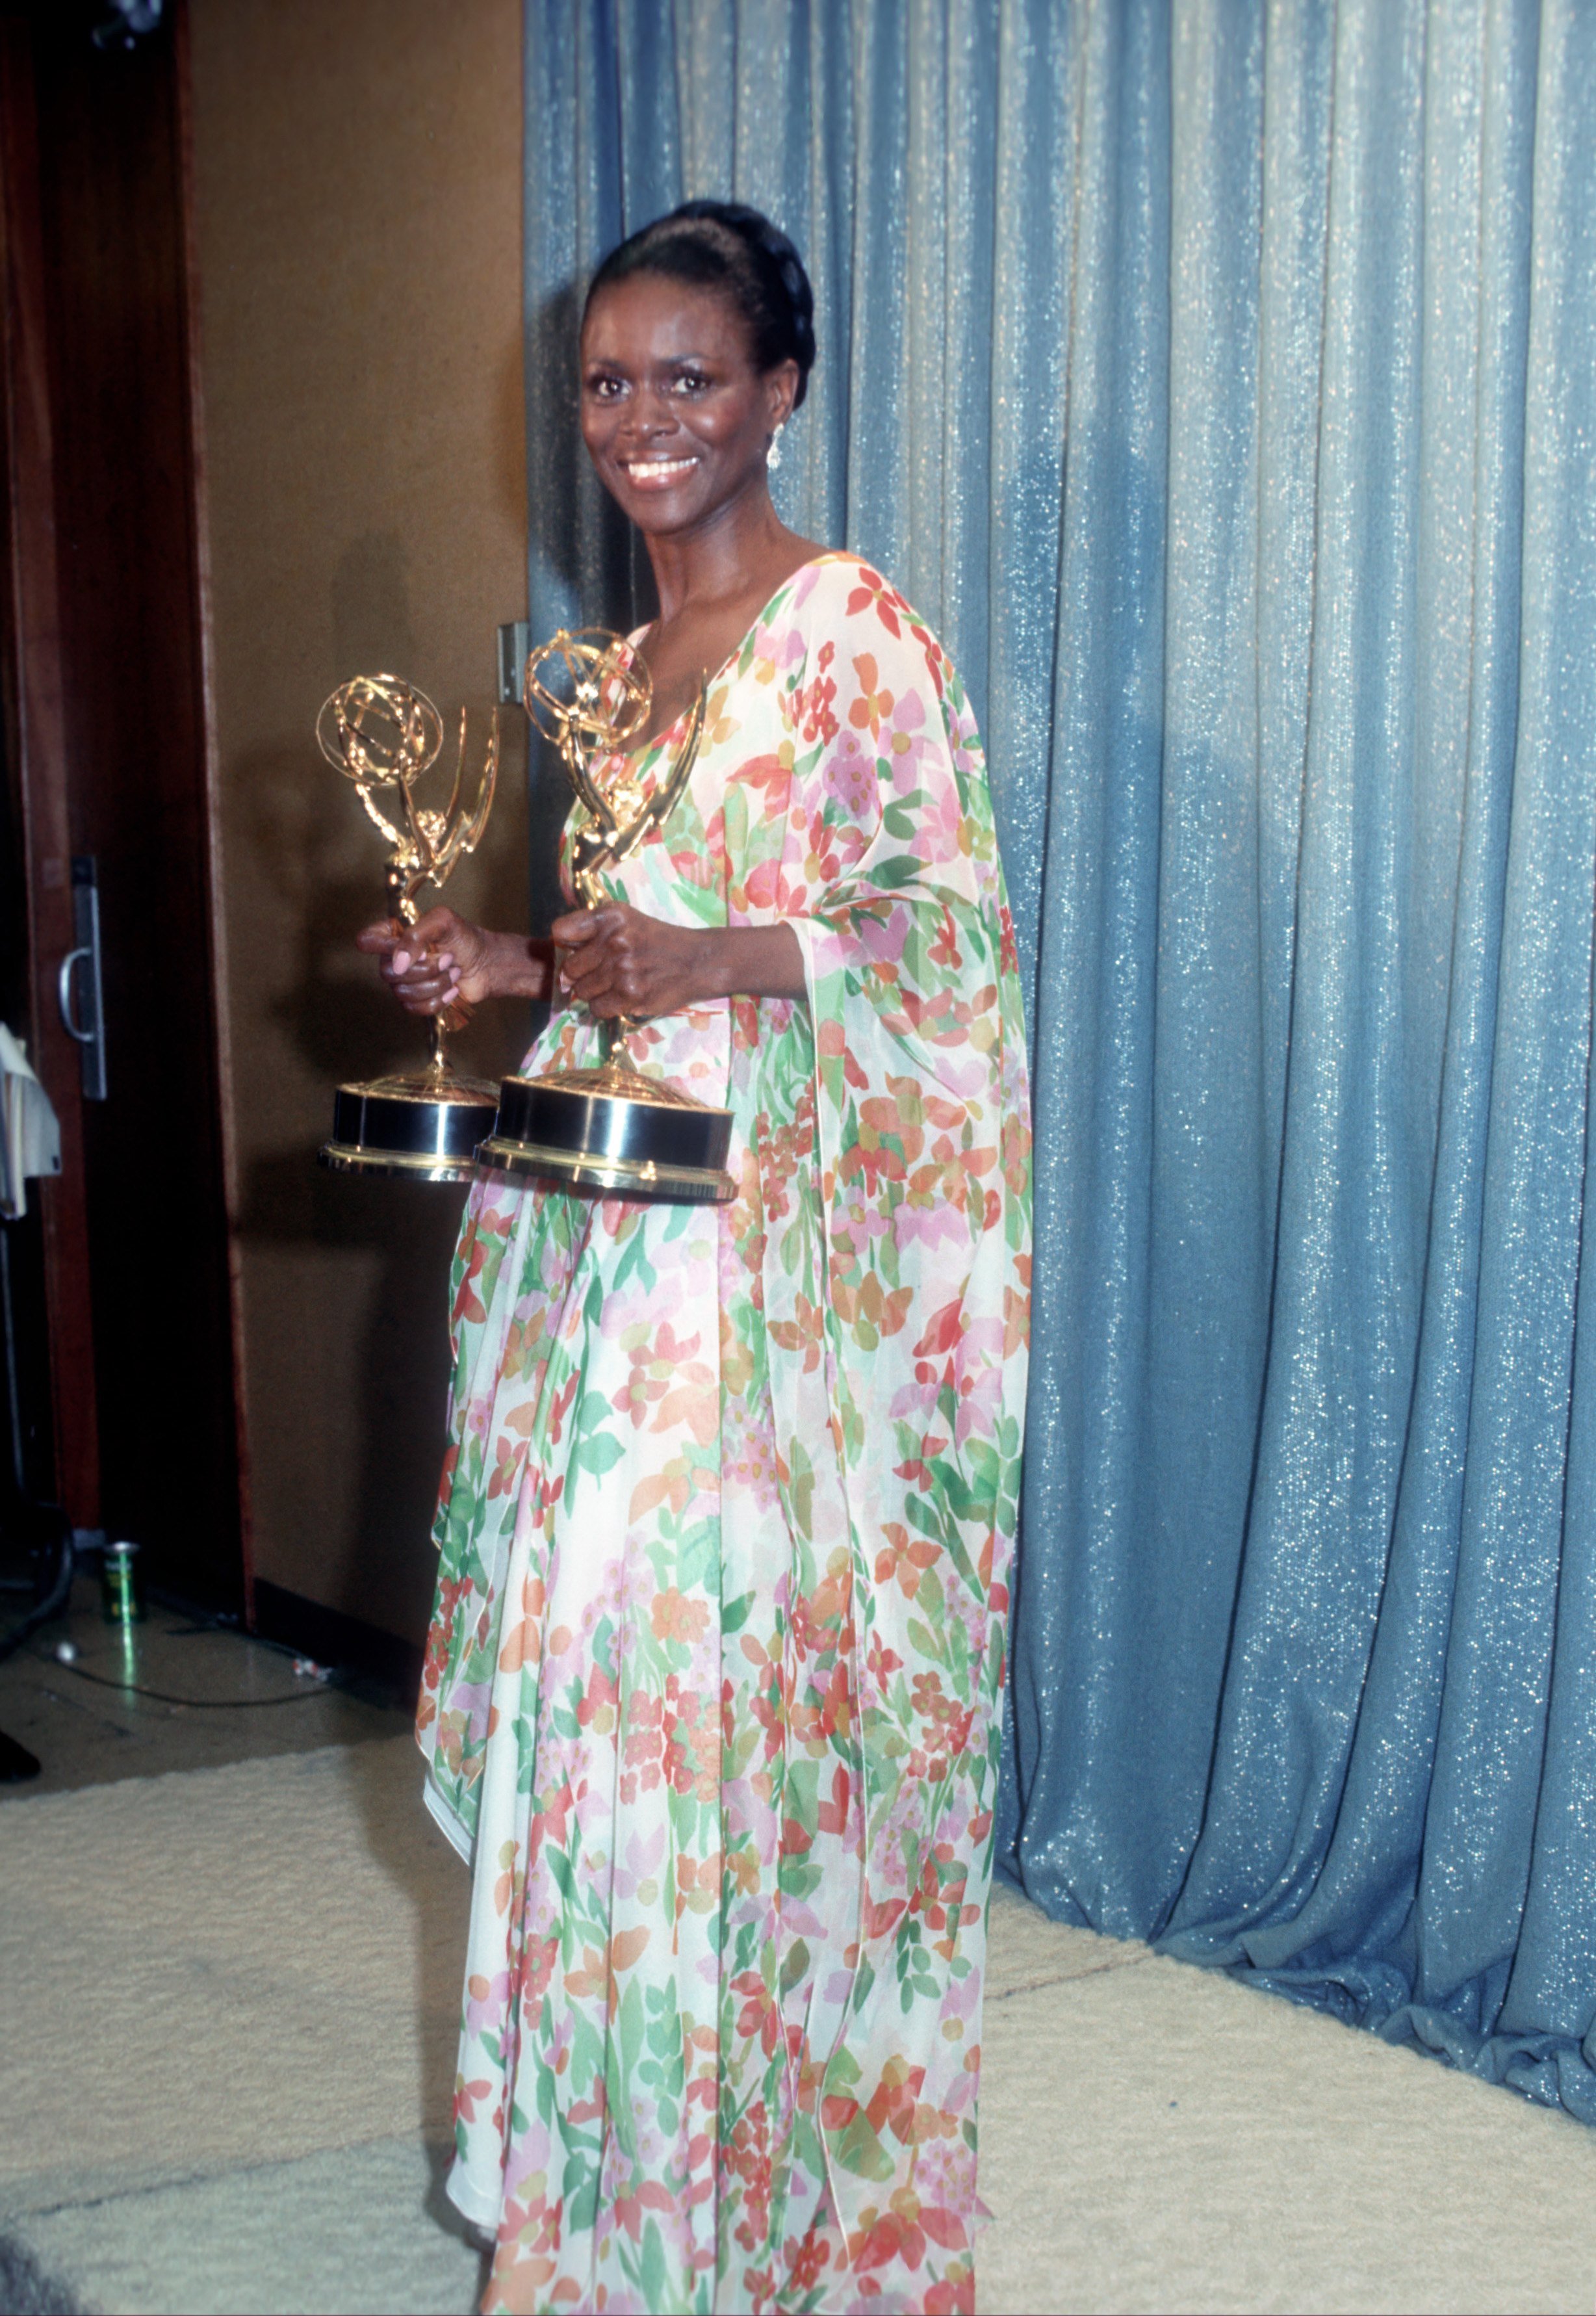 Cicely Tyson holds the two Emmy Awards that she won for her performance in "The Autobiography Of Miss Jane Pittman" on May 28, 1974. | Photo: Getty Images